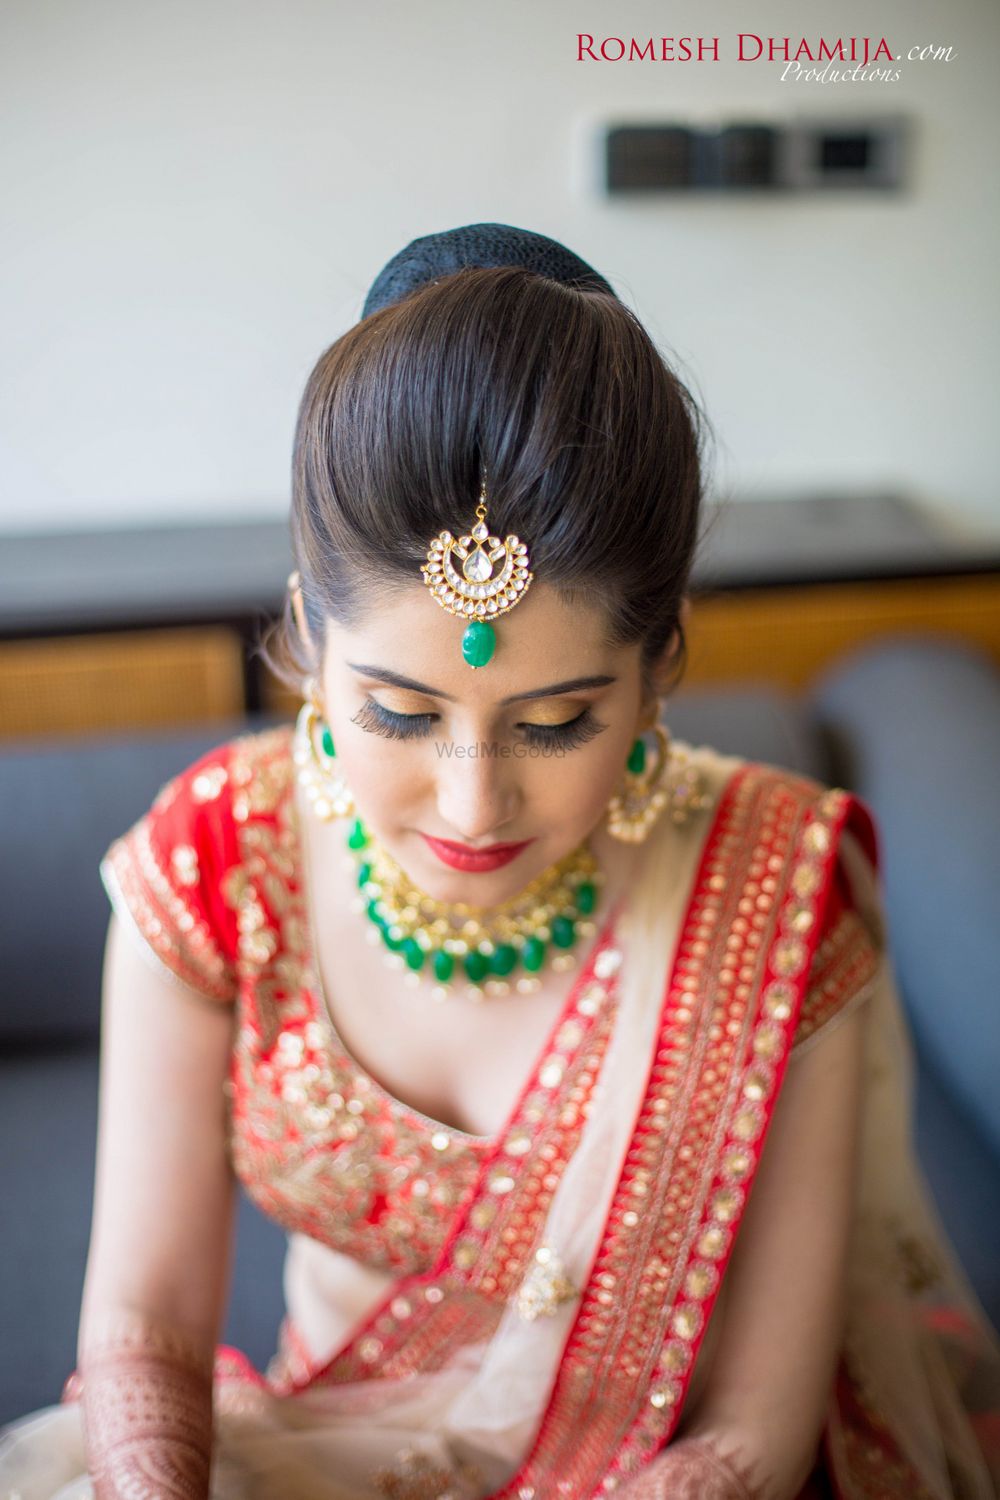 Photo of Contrast jewellery in emerald green with red lehenga